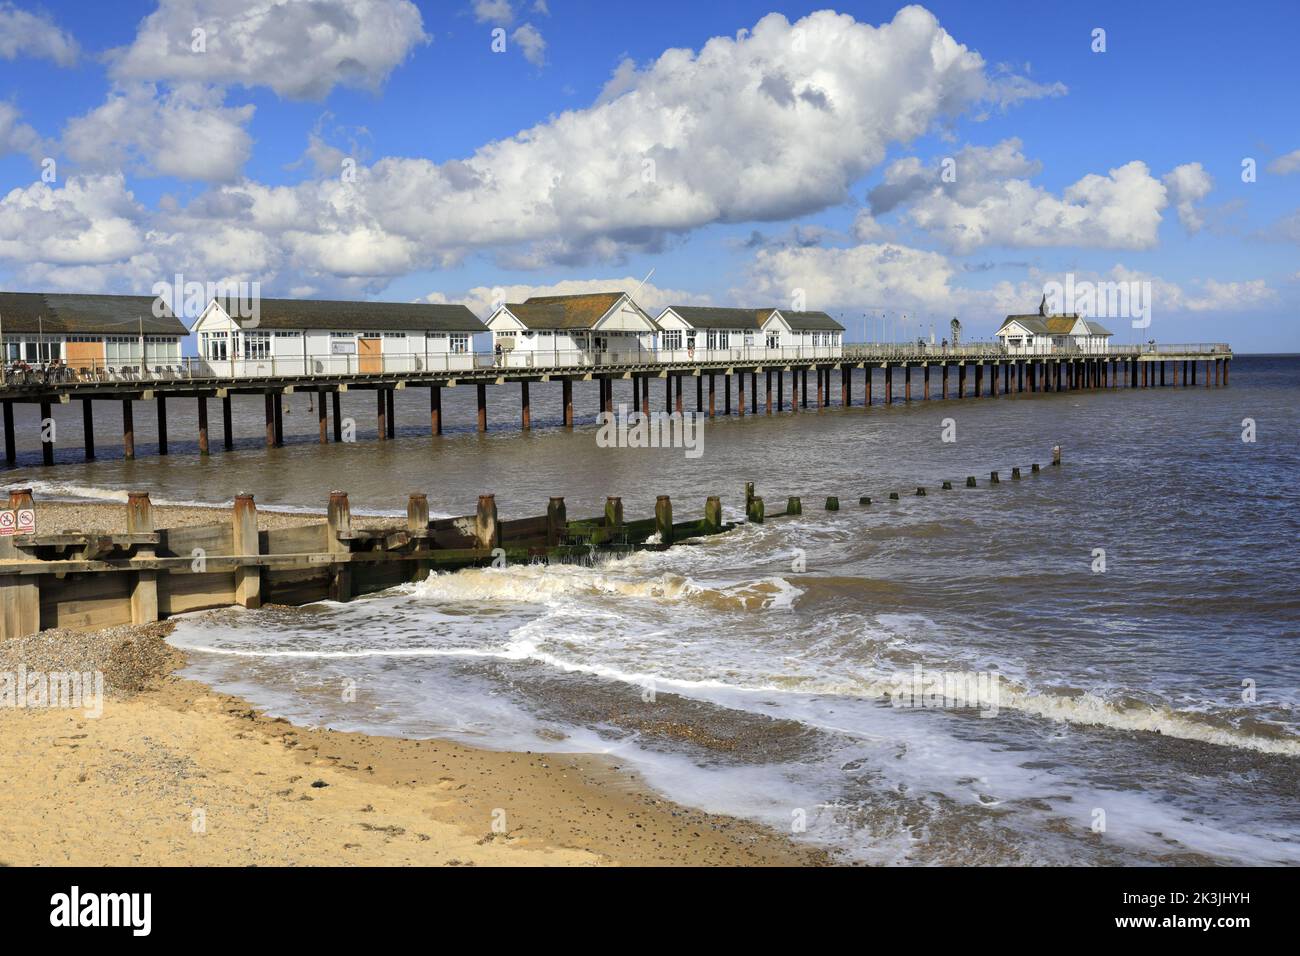 The pier at Southwold town, Suffolk, England, UK Stock Photo